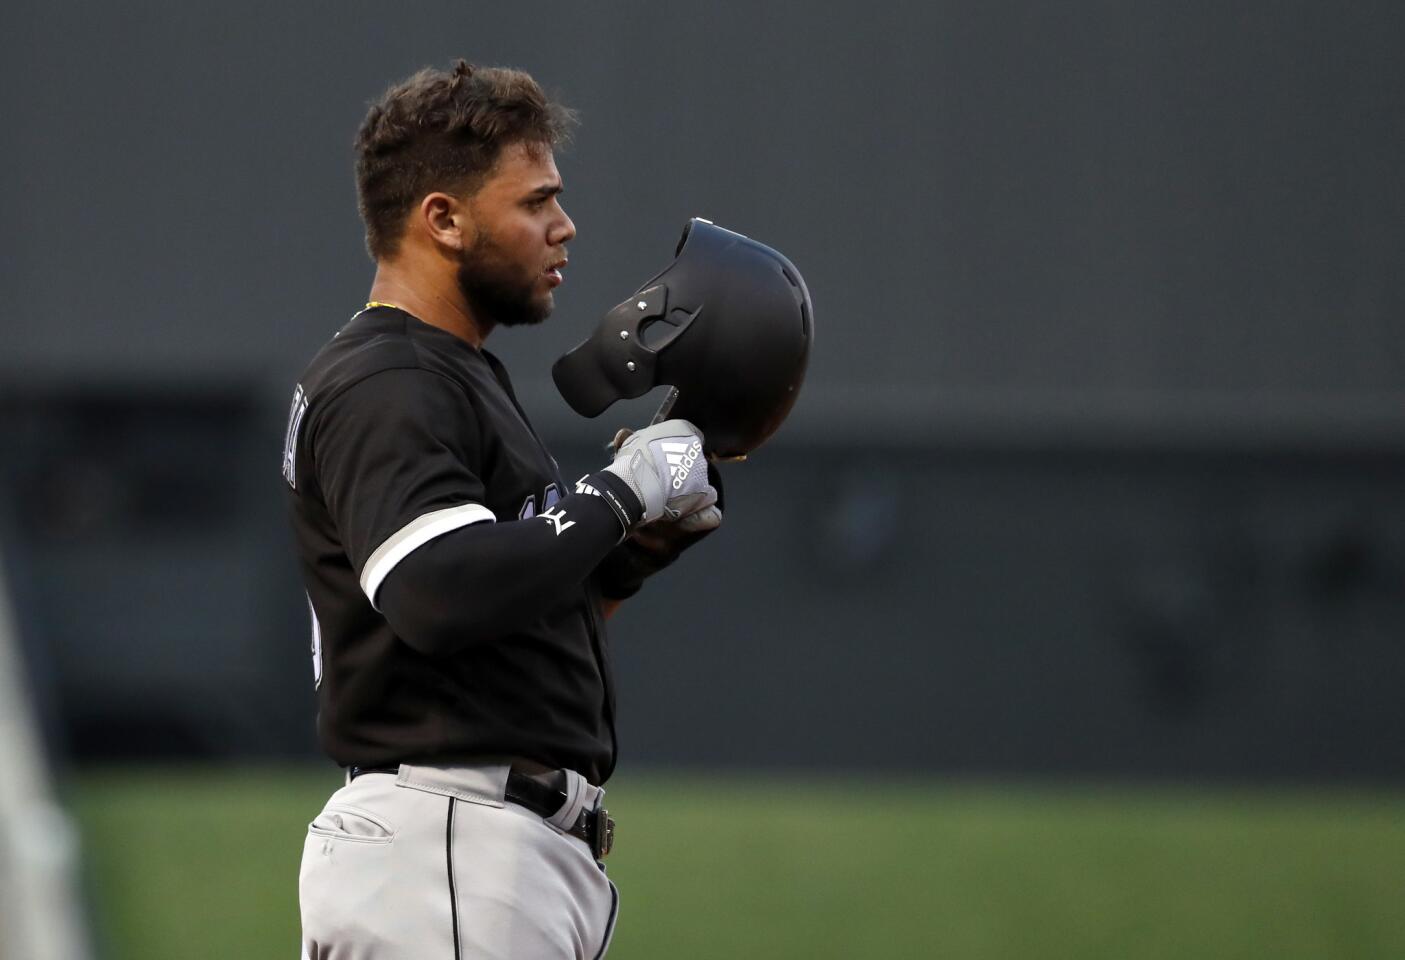 The White Sox's Yoan Moncada stands on third base during the first inning against the Cardinals, Tuesday, May 1, 2018, in St. Louis.